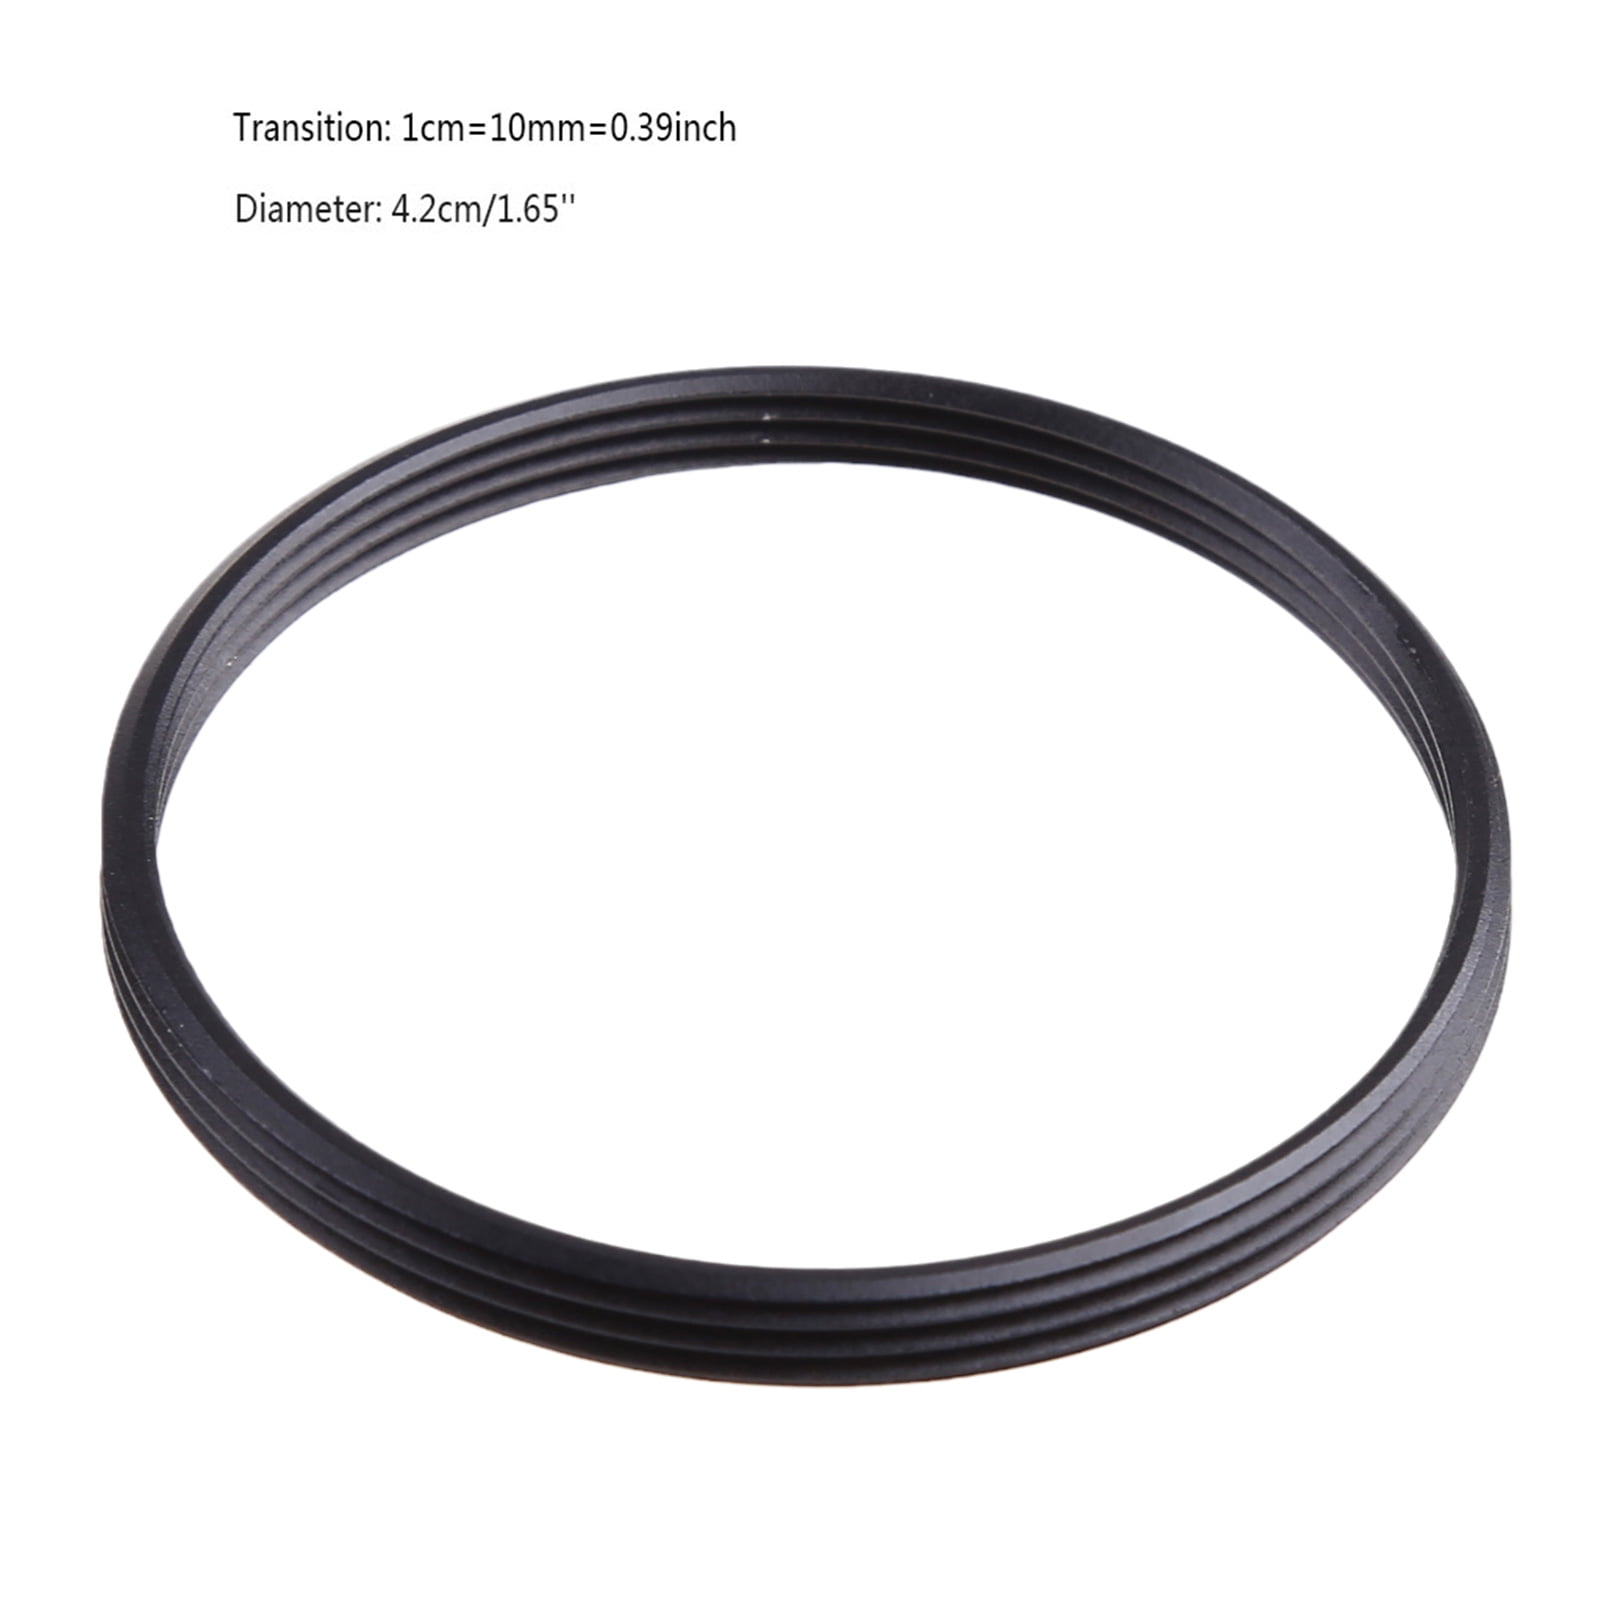 NEW High Quality M42 or M39 lens to Nikon SLR or DSLR Camera Mount Adapter Ring 